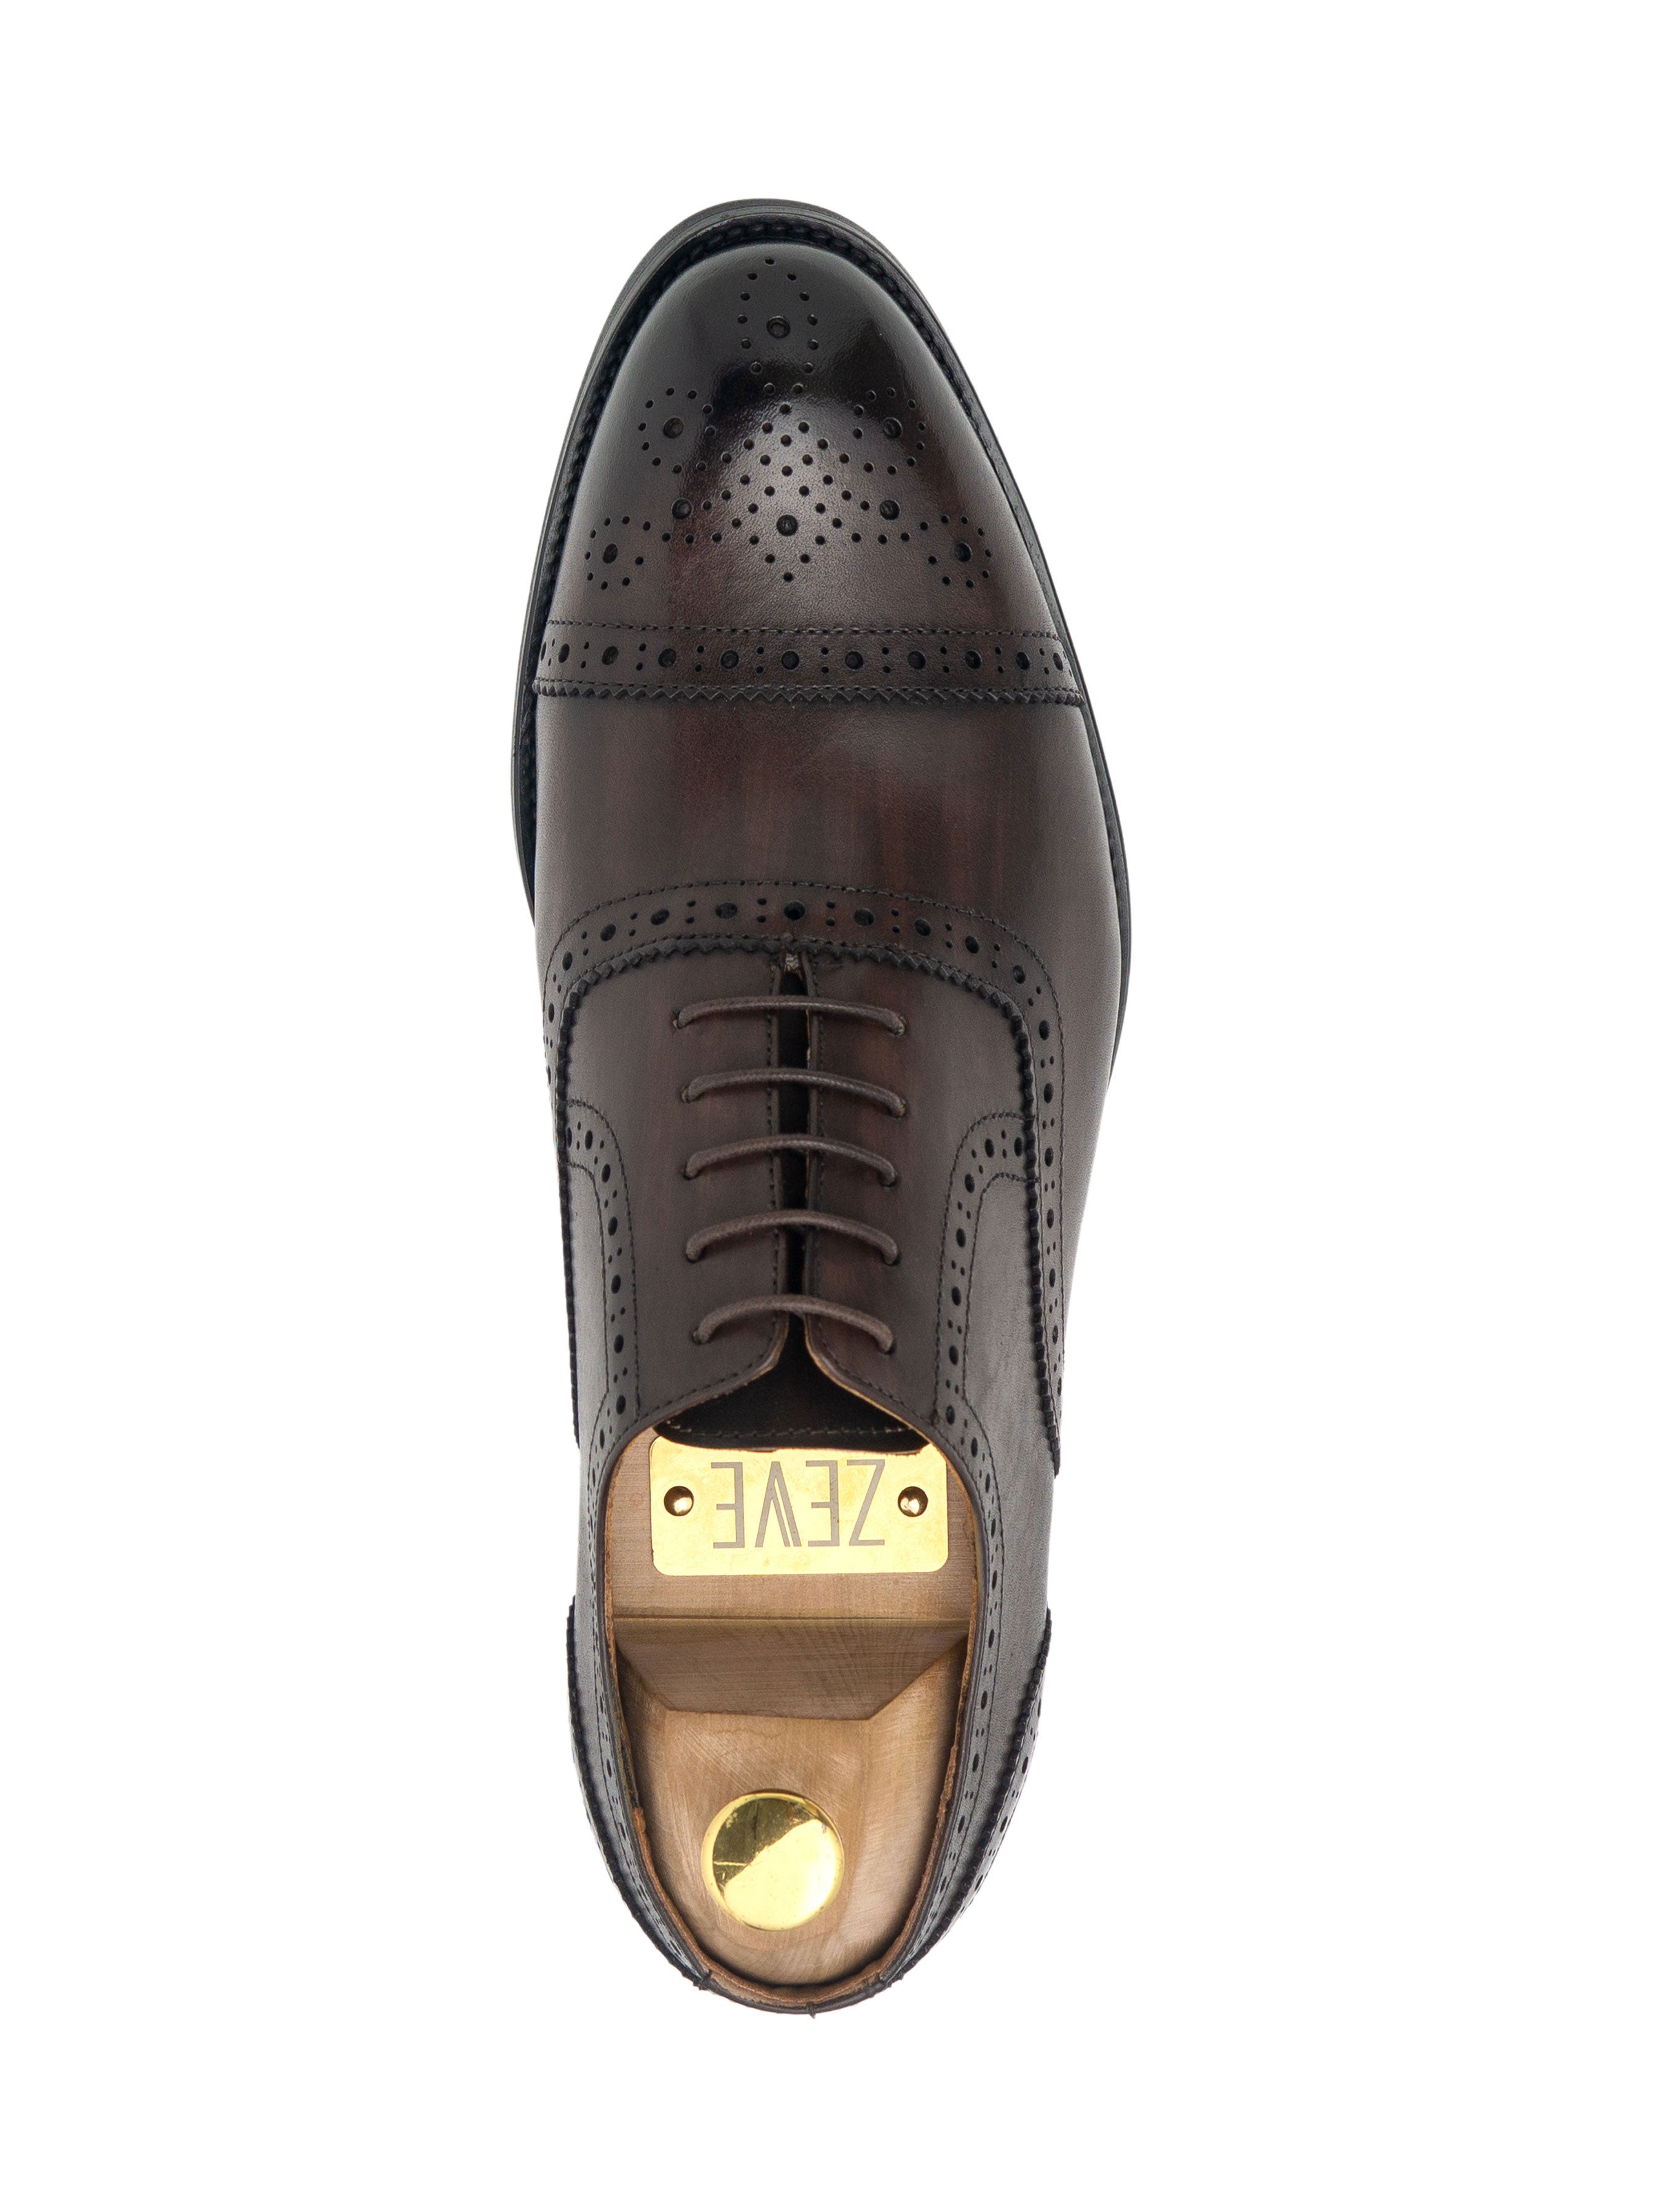 Oxford Cap Toe - Dark Brown Semi Brogue Lace Up (Hand Painted Patina) - Zeve Shoes